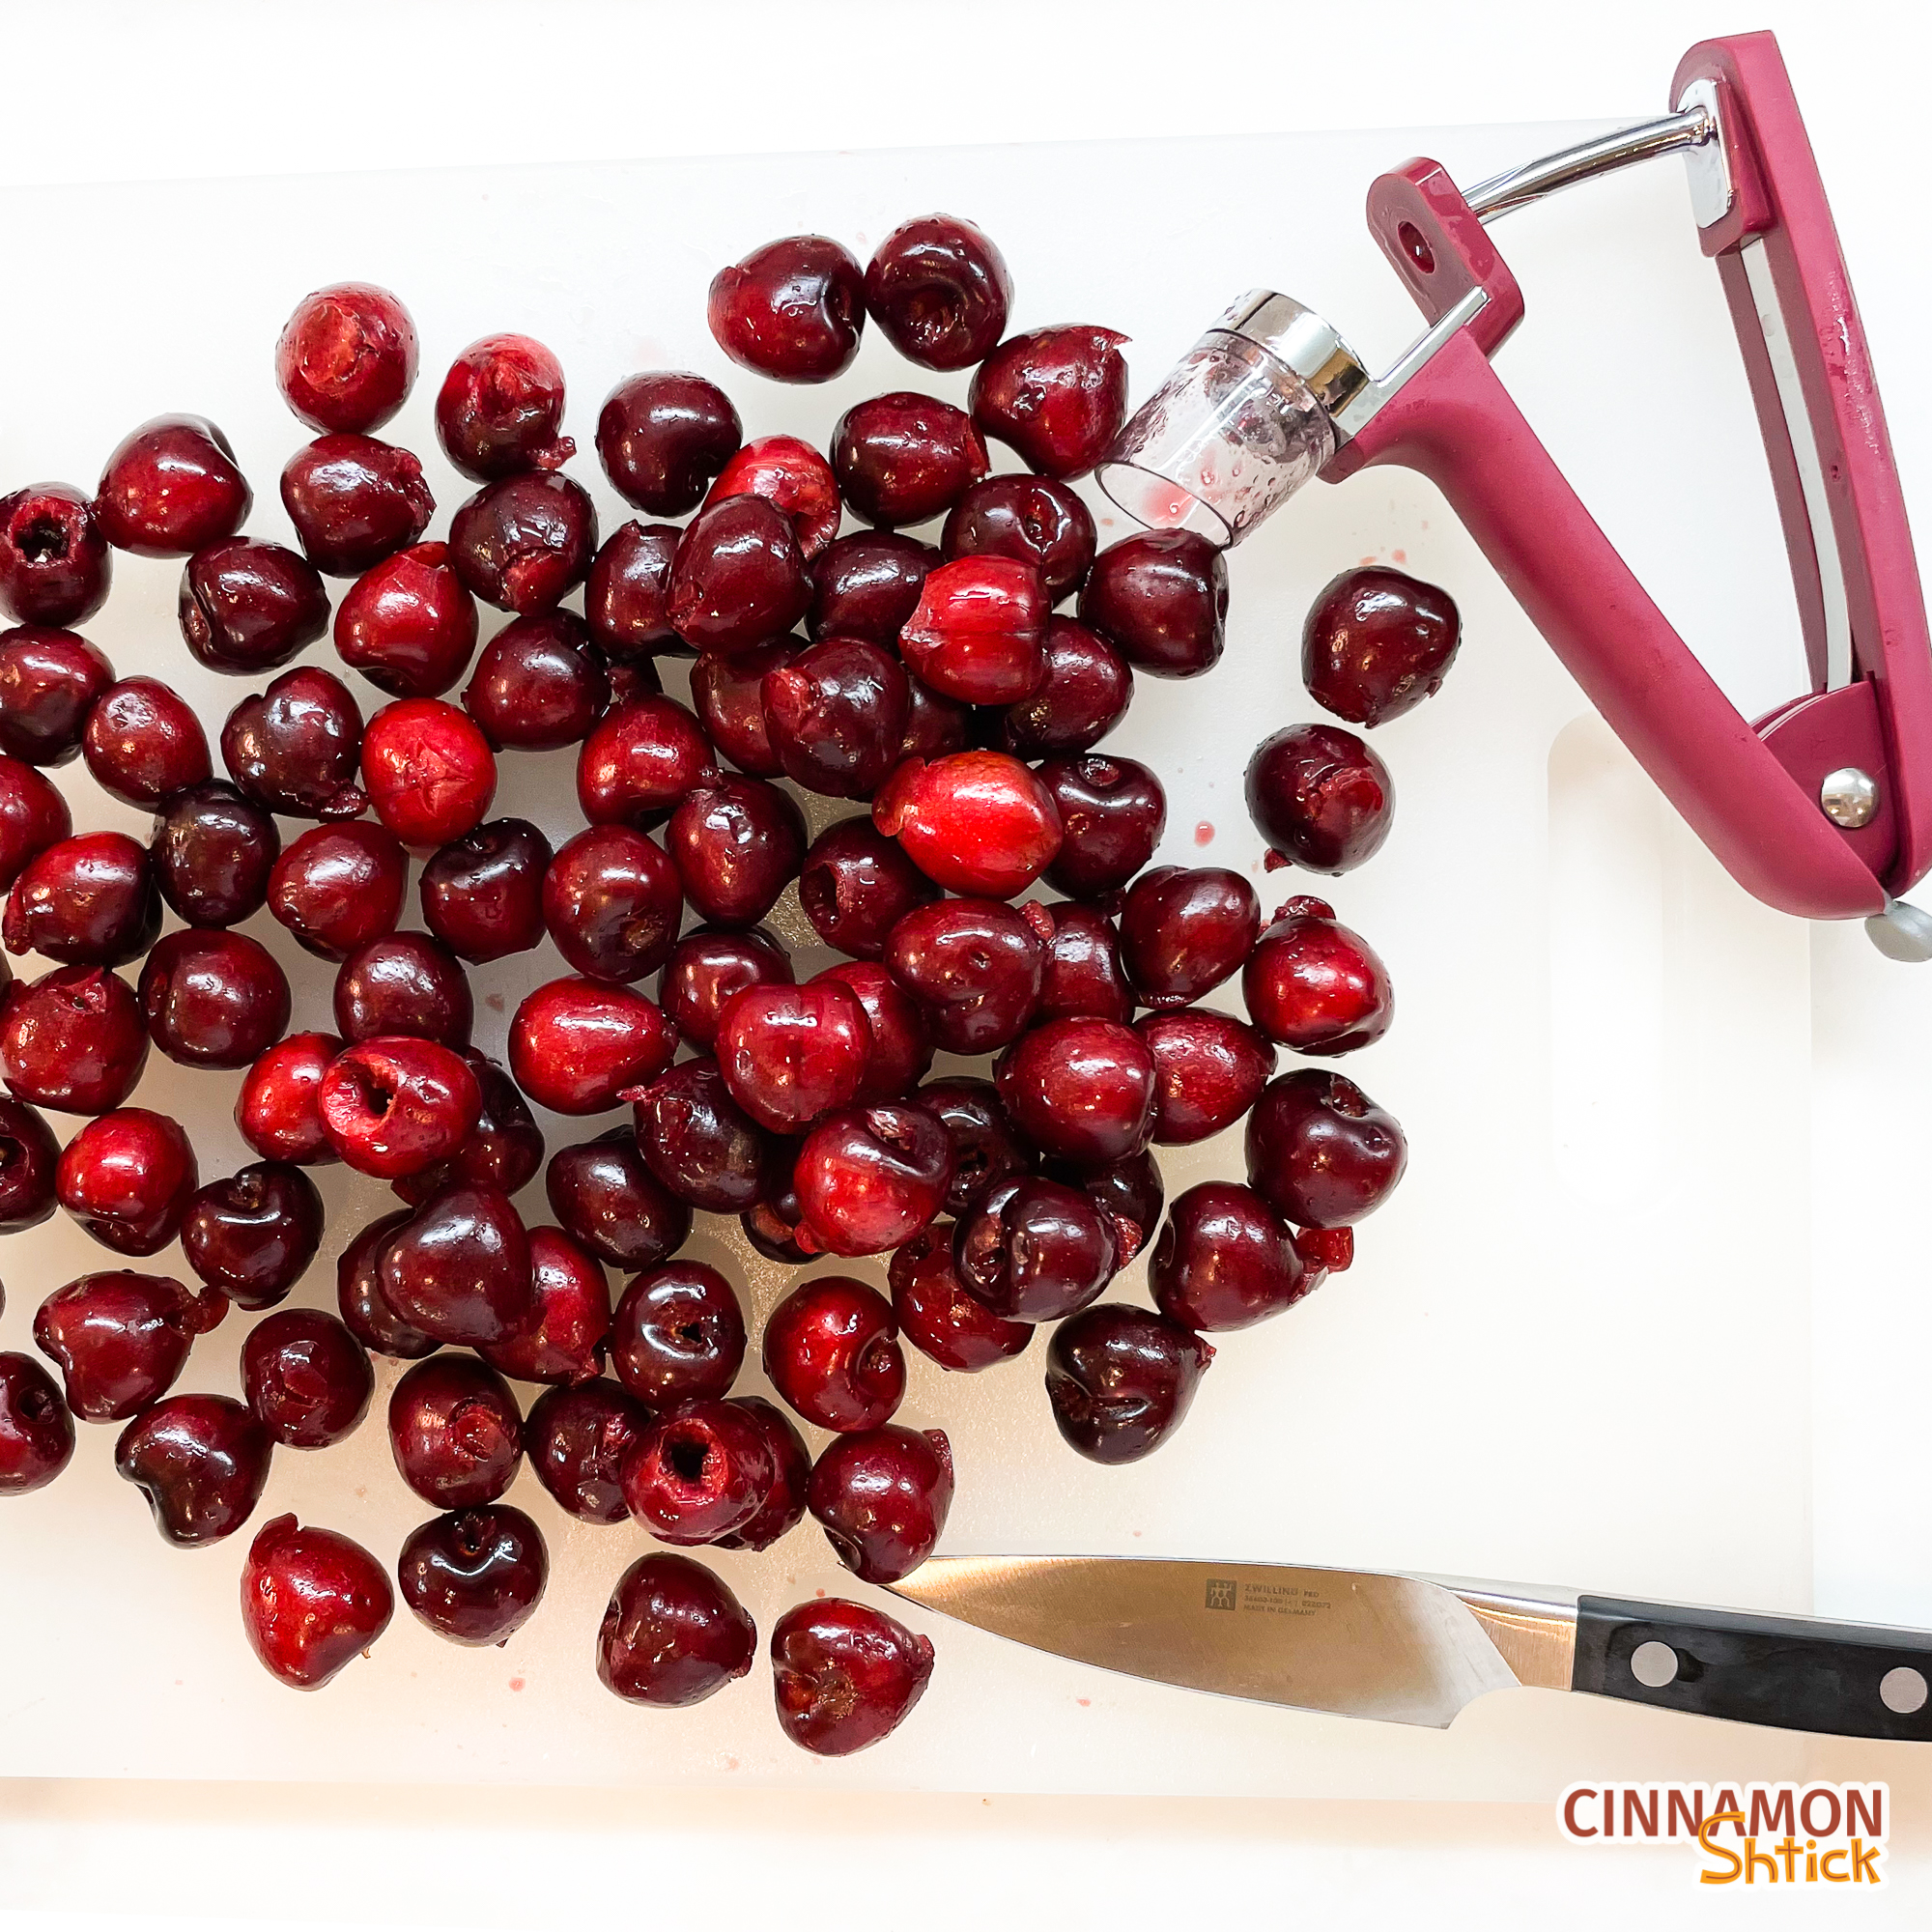 Pitted cherries on cutting board with cherry pitter and a paring knife